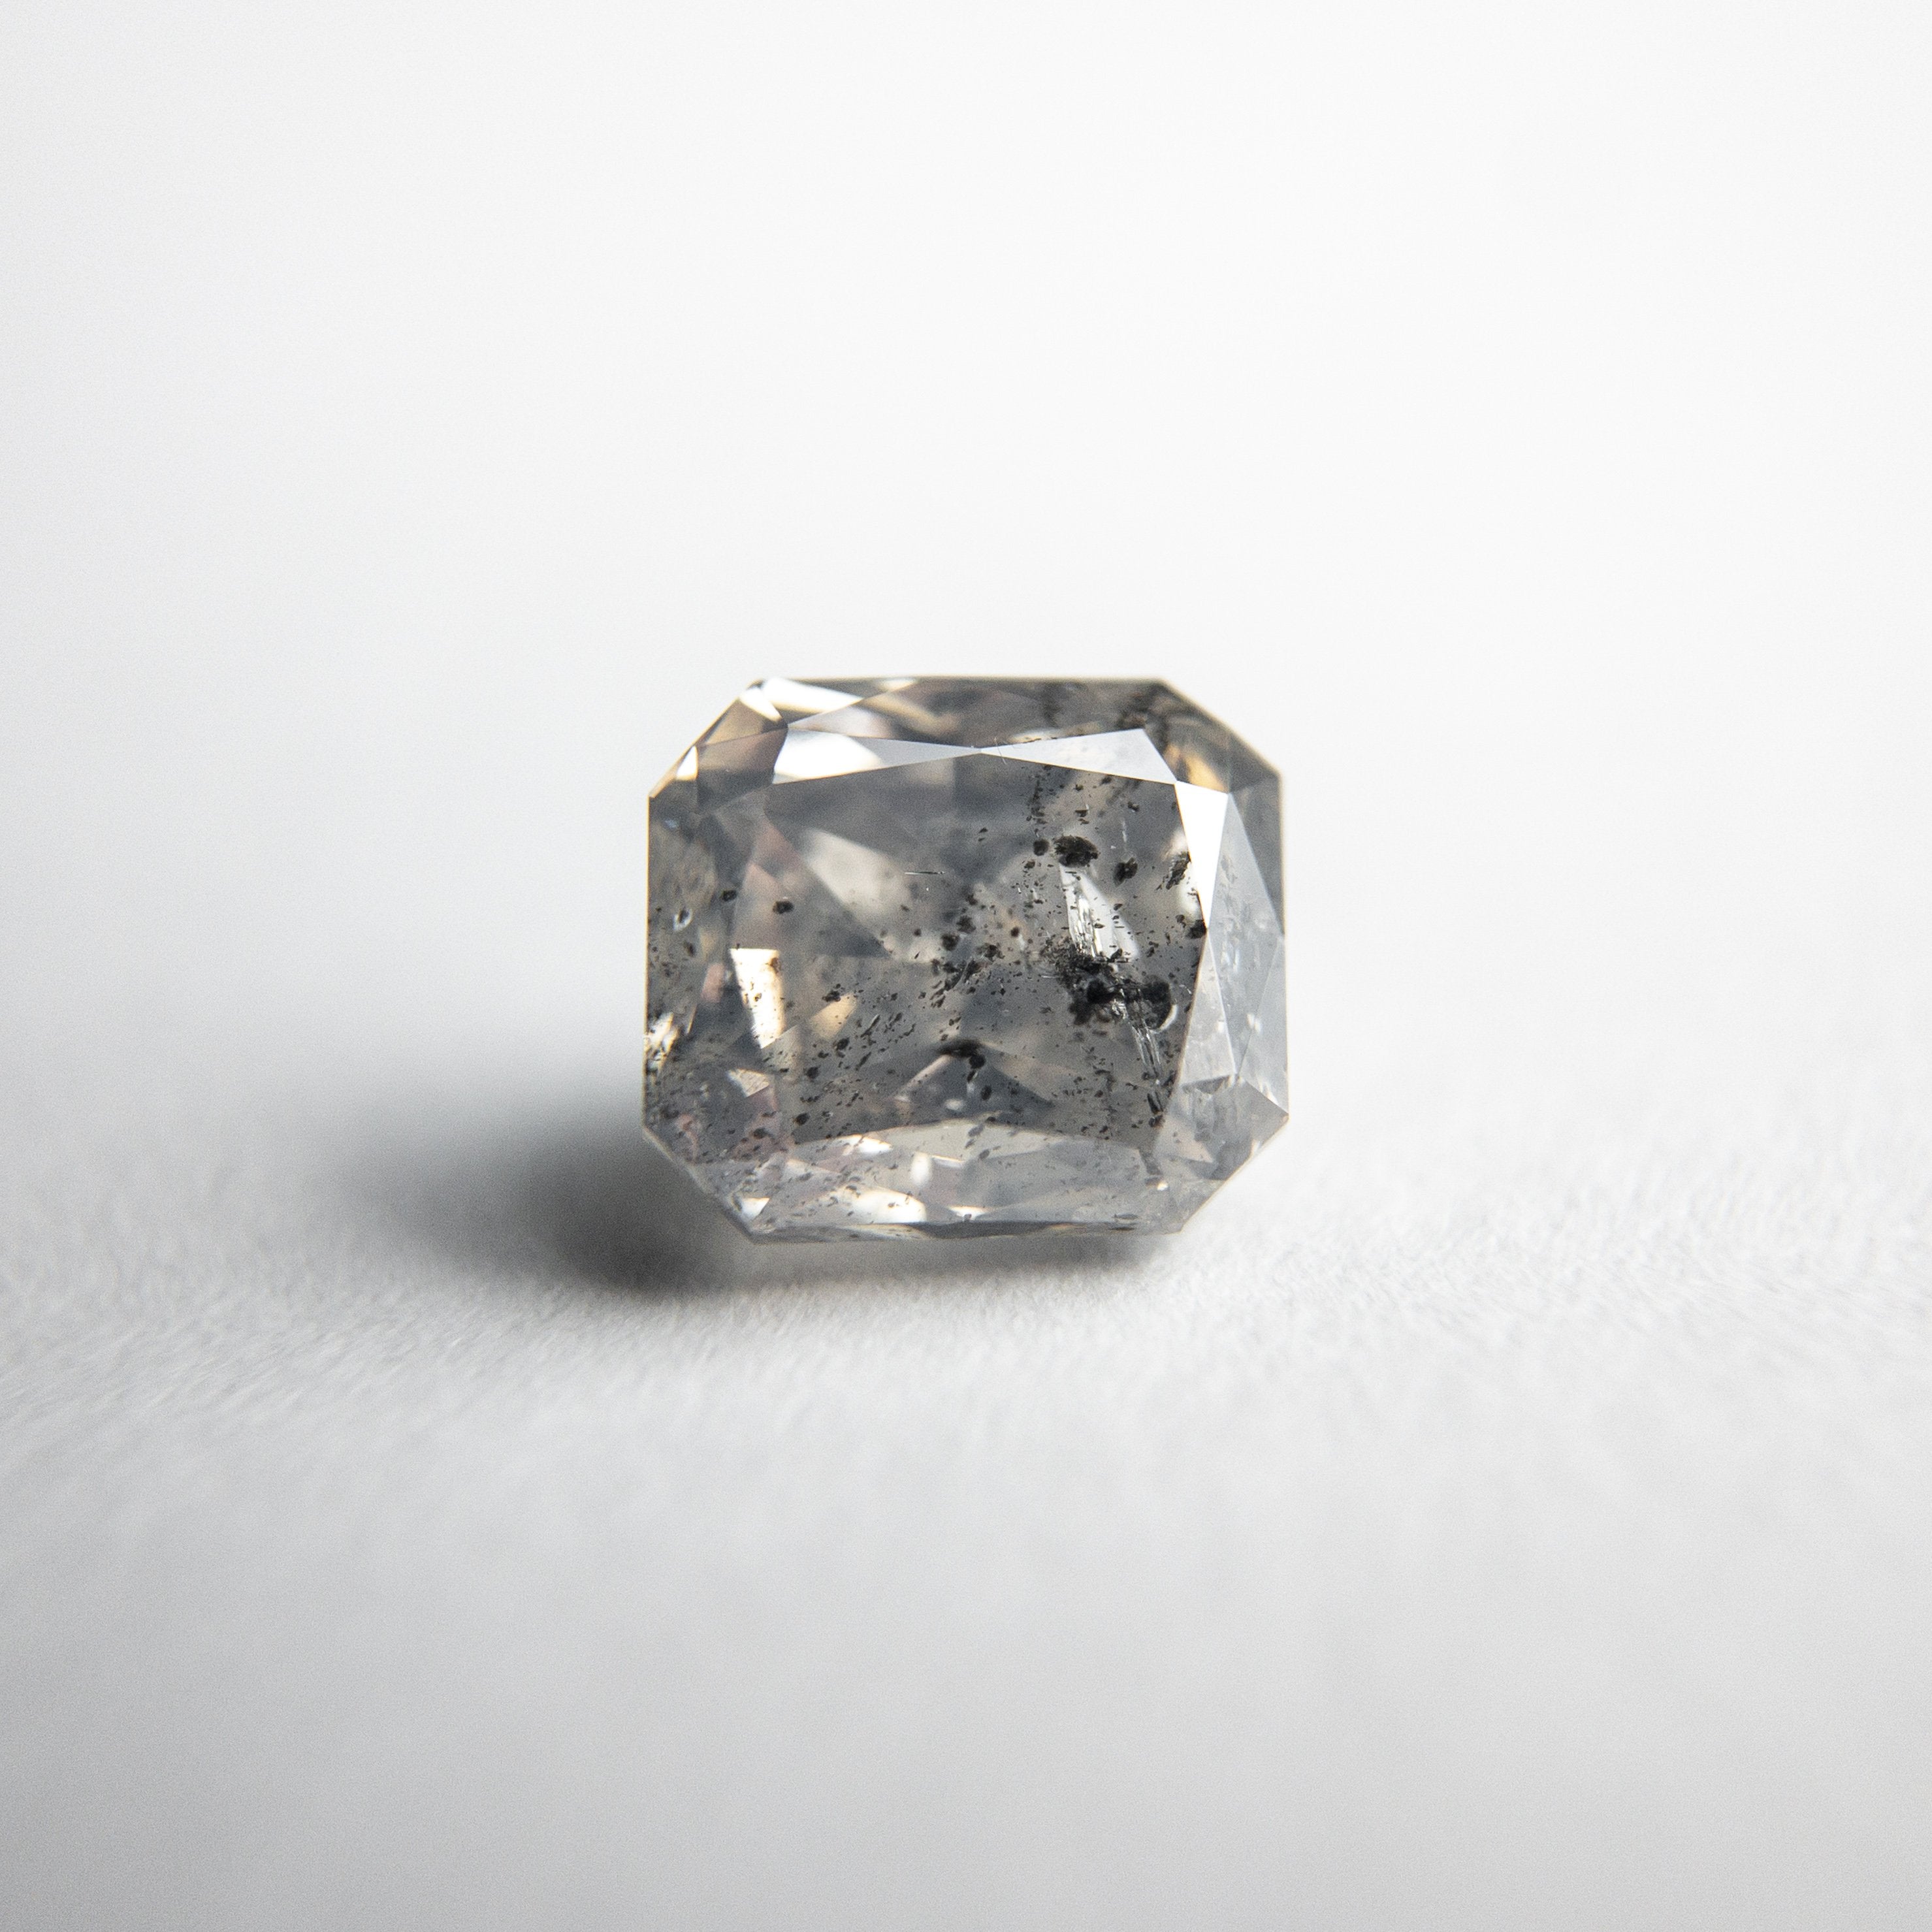 1.13ct 5.98x5.30x3.80mm Radiant Cut 18388-09 HOLD D1811 1.21.21